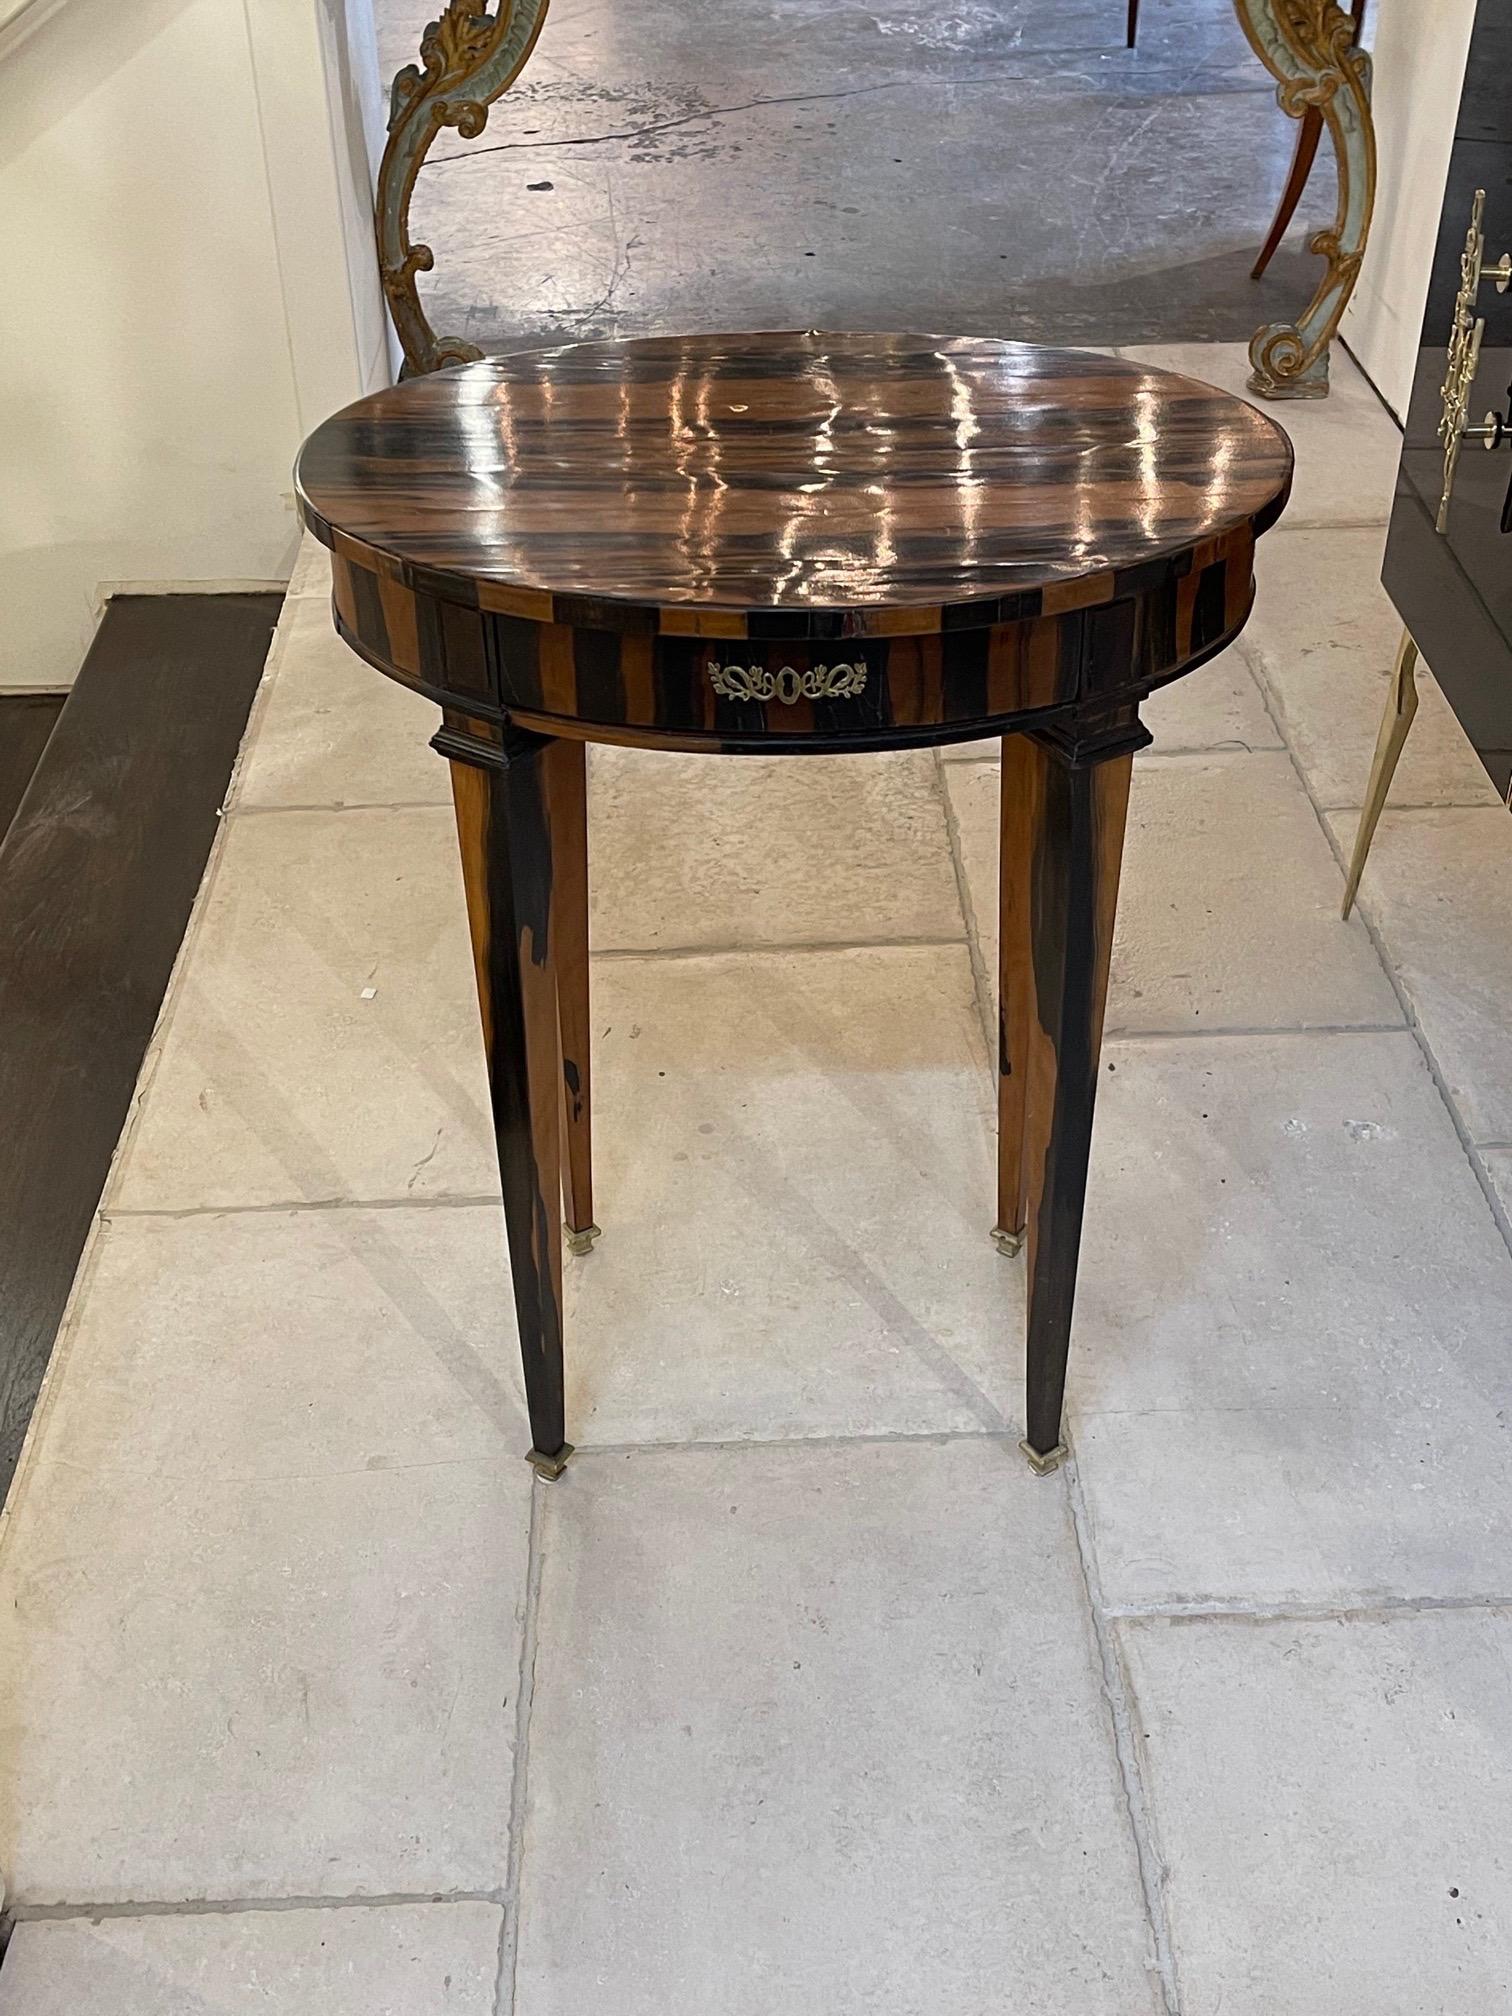 Handsome 19th century Italian Exotic Madagascar round wood side table. Beautiful finish and variation in the wood. Pretty brass details as well. So elegant!